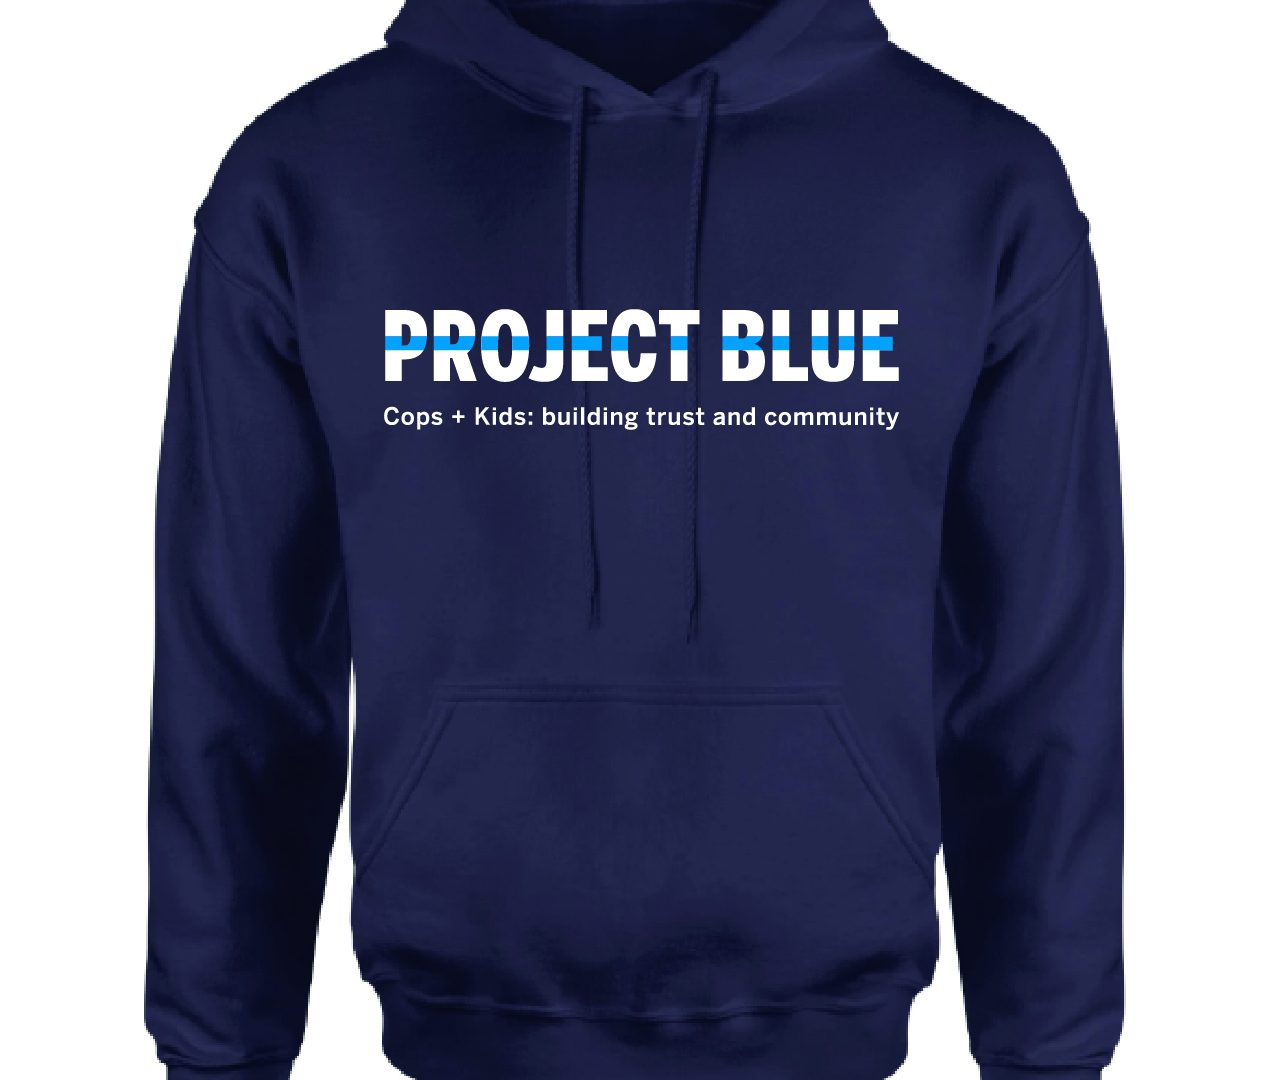 A blue hoodie with the words project blue written on it.